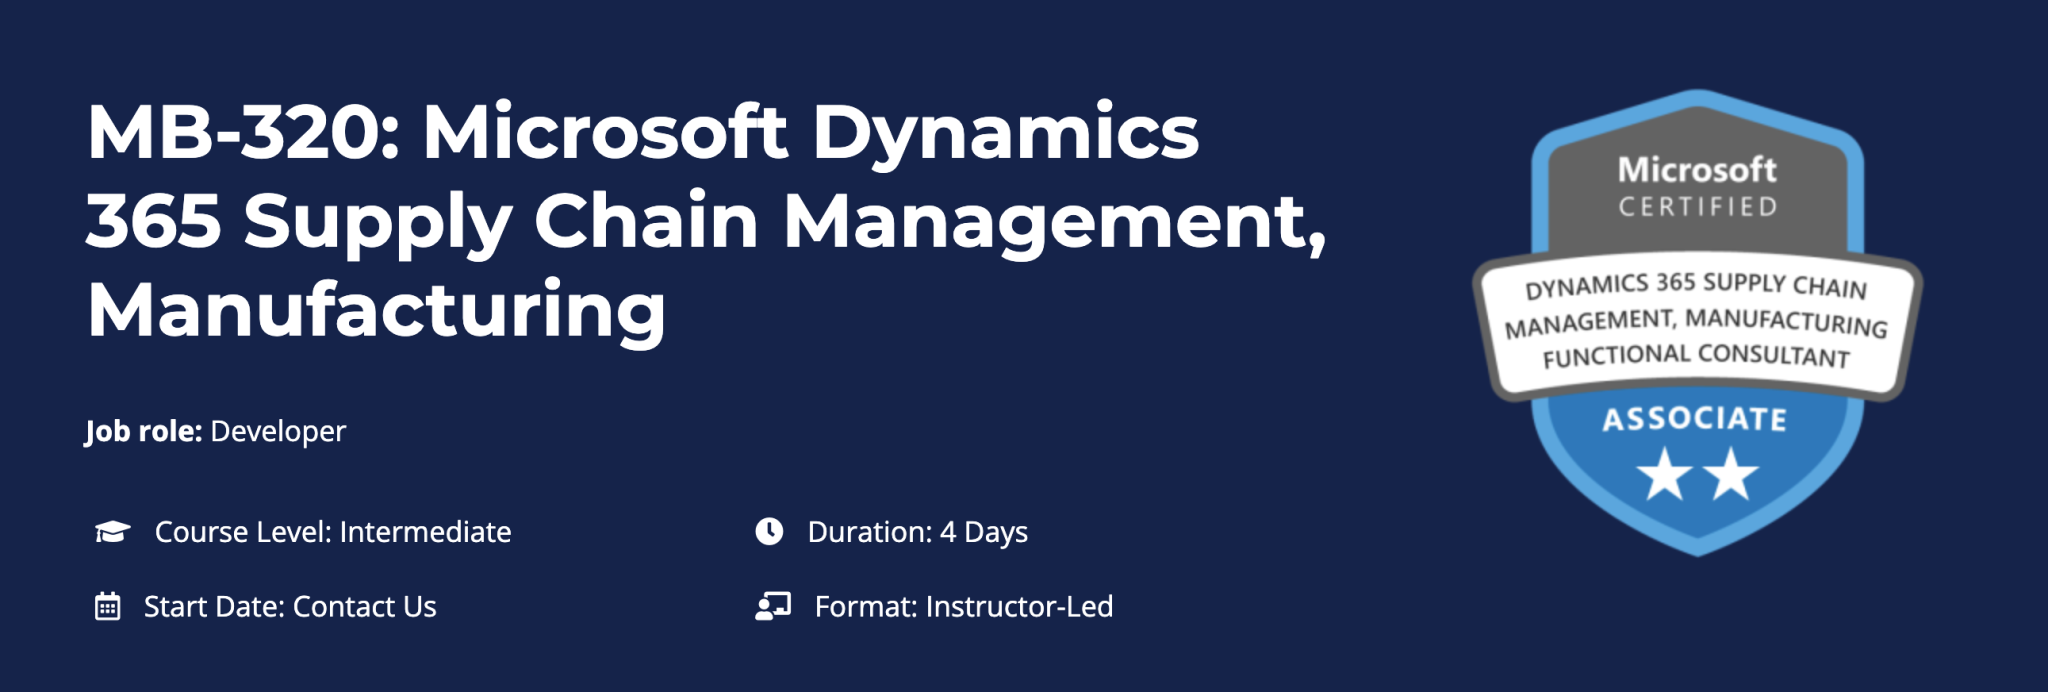 MB-320: Microsoft Dynamics 365 Supply Chain Management Manufacturing